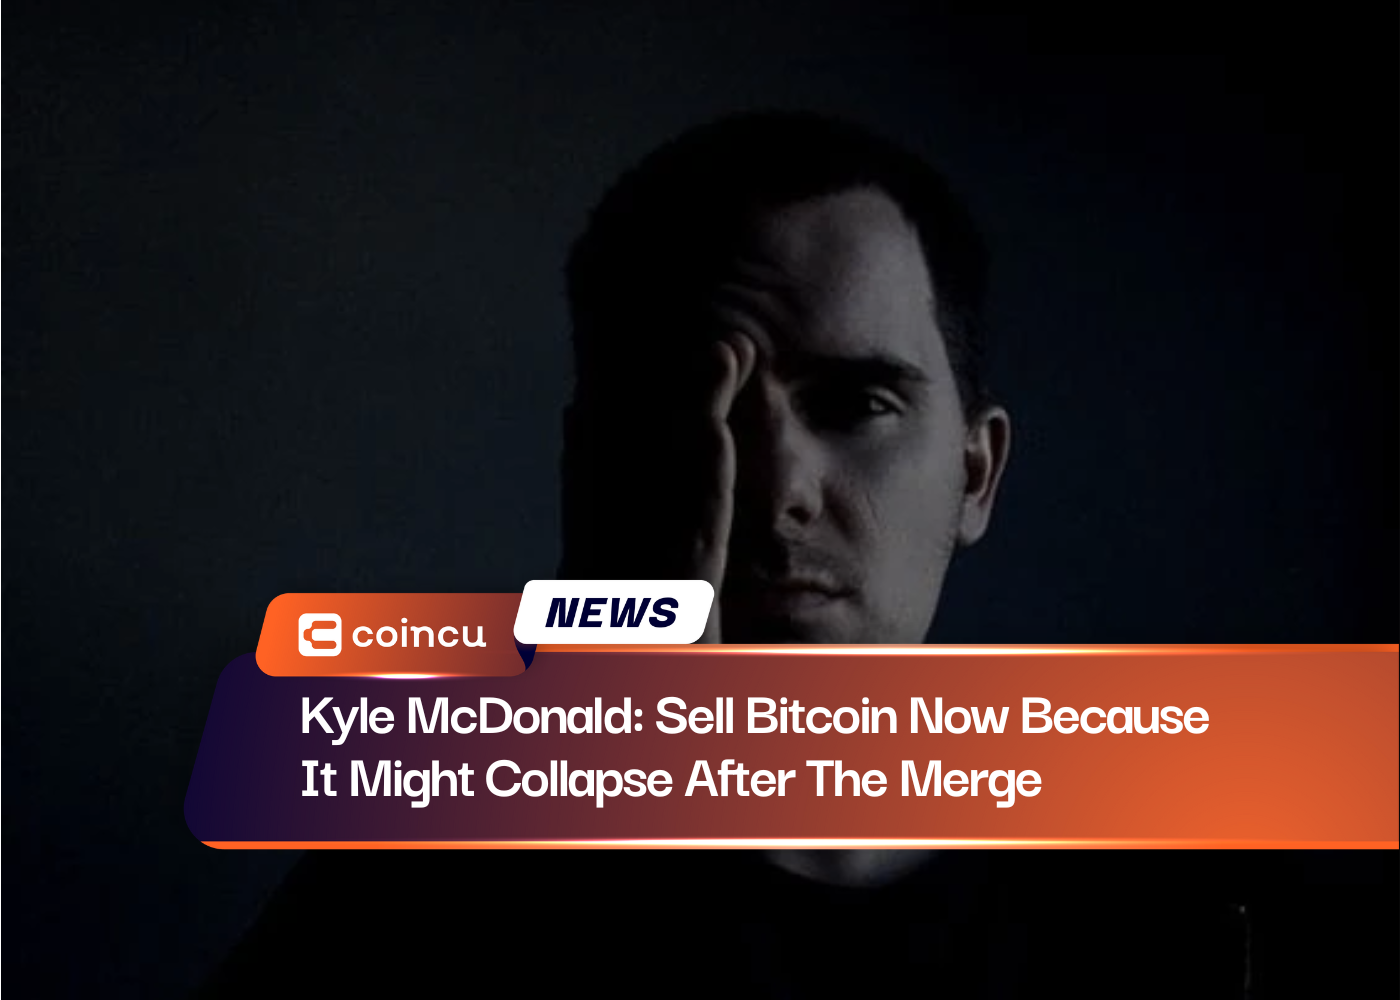 Kyle McDonald: Sell Bitcoin Now Because It Might Collapse After The Merge